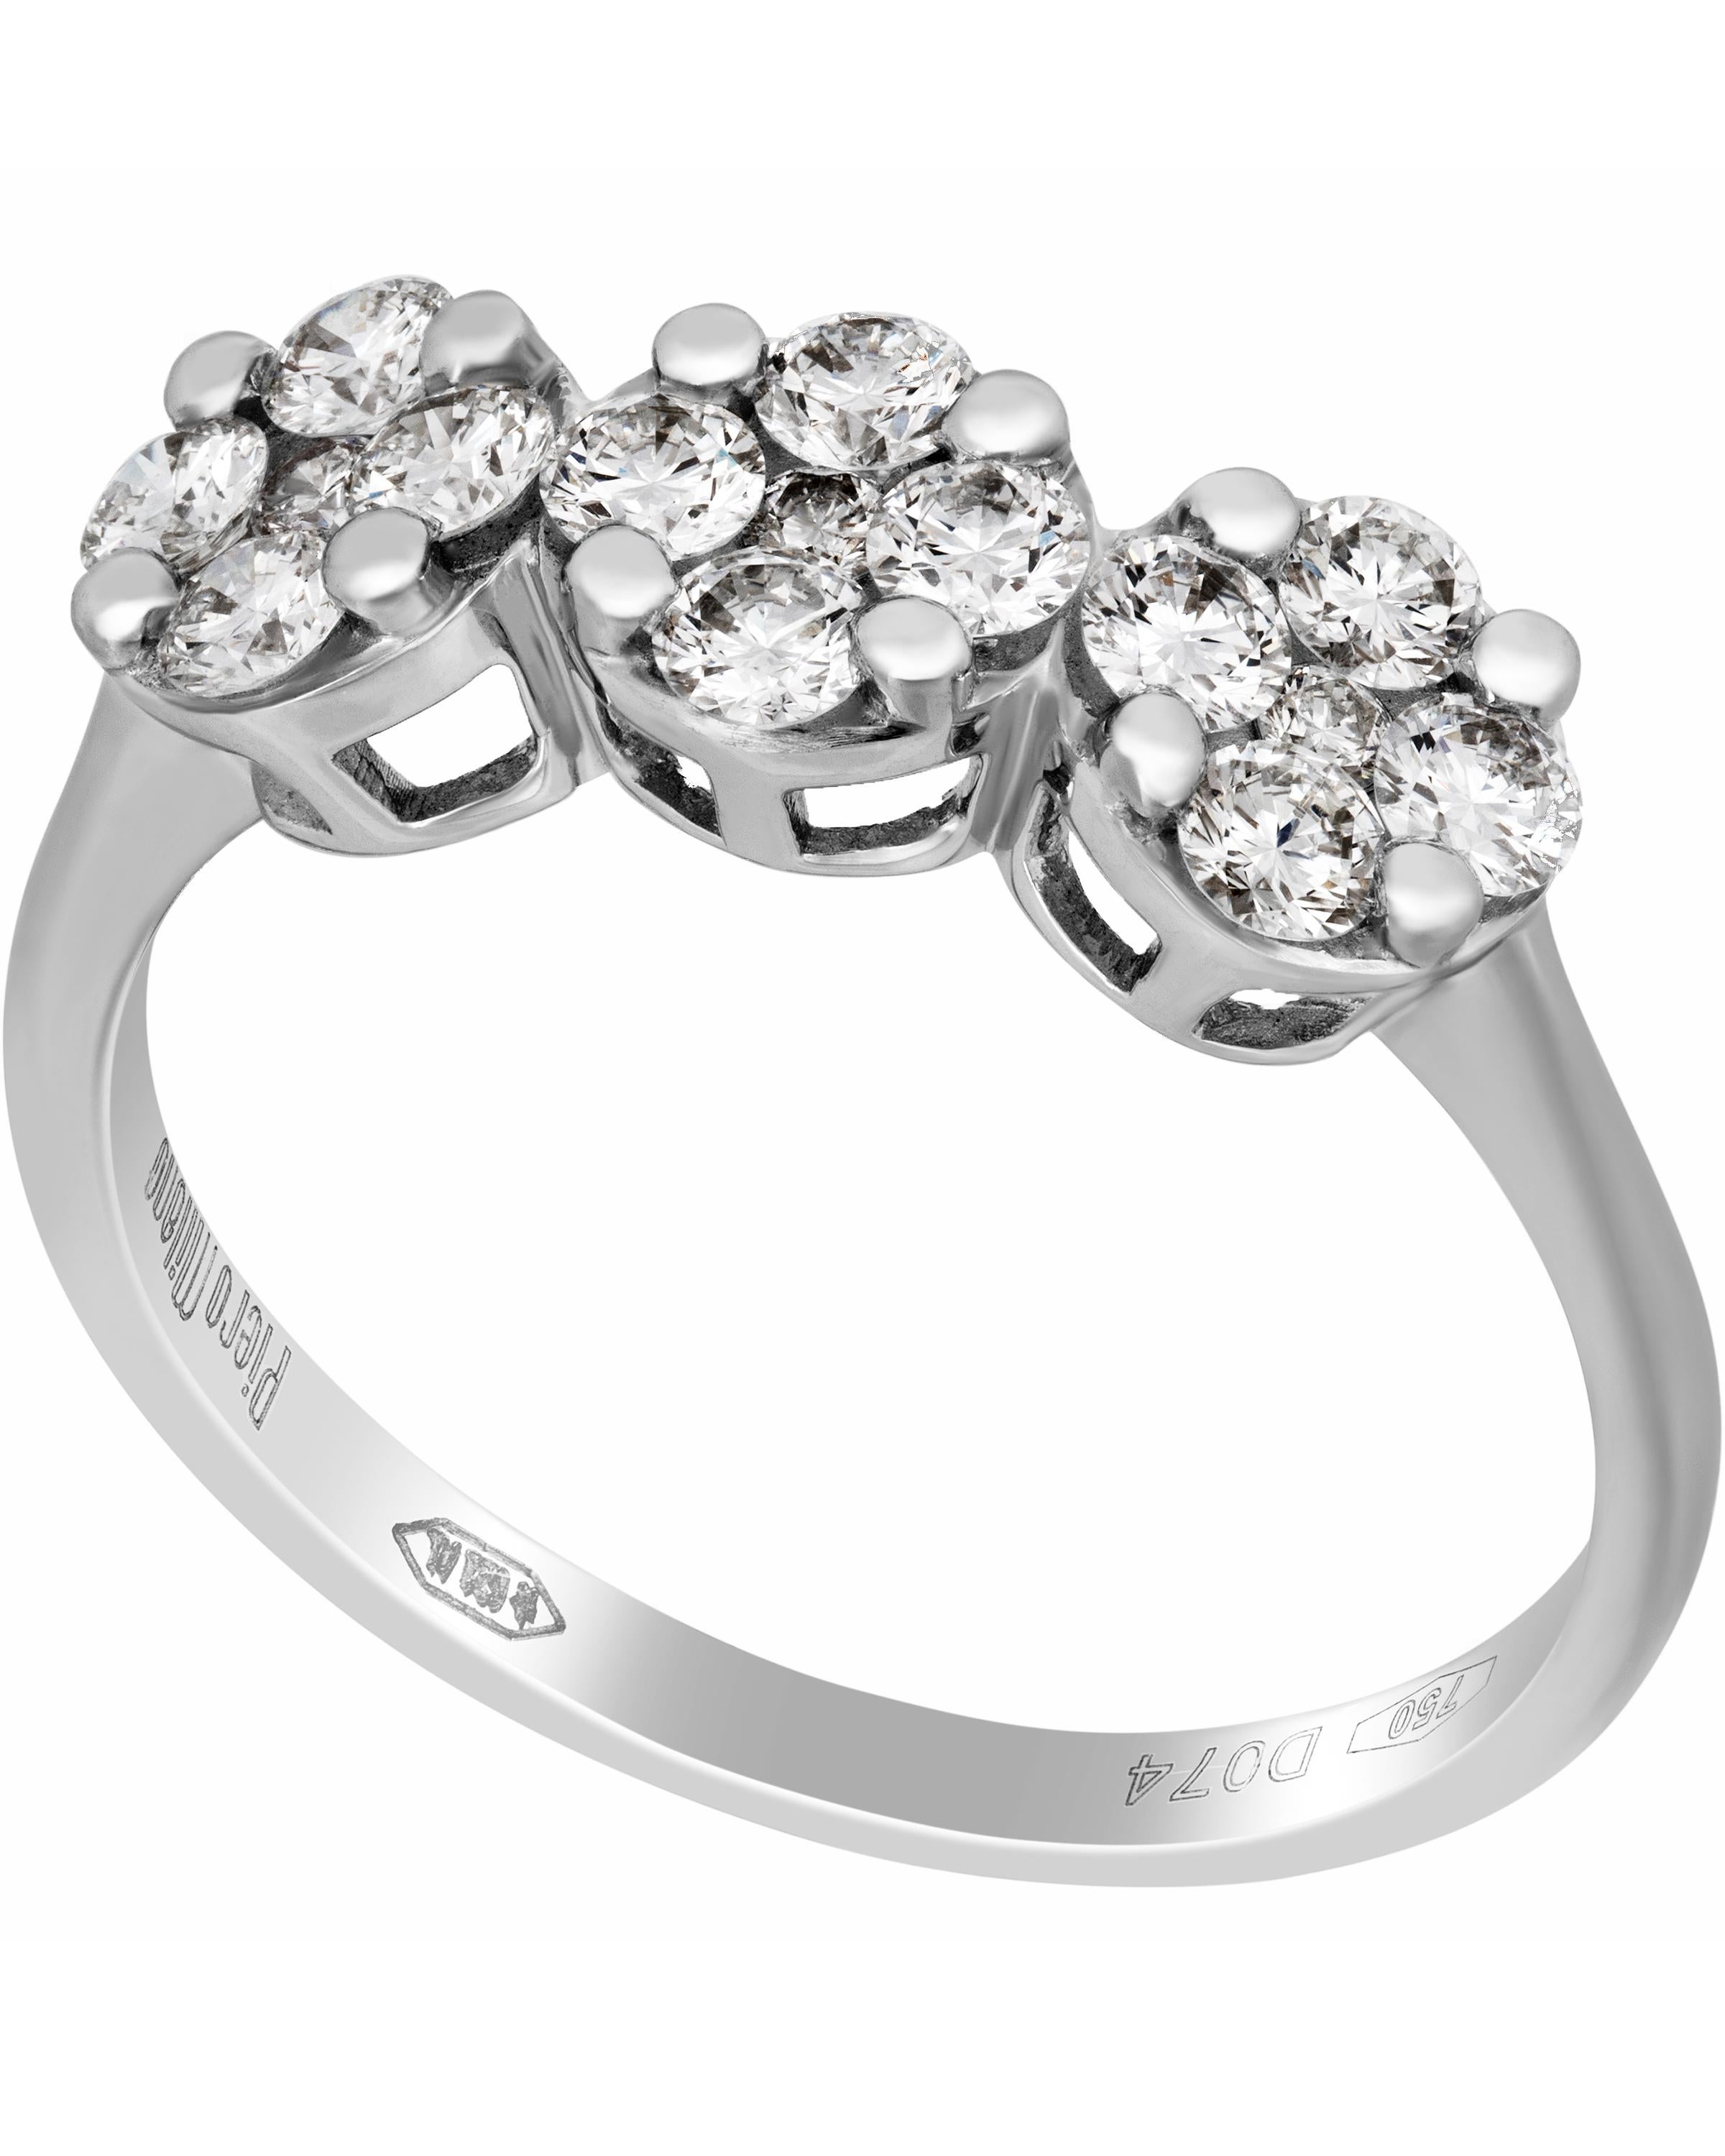 This beautiful Piero Milano 18K White Gold Band Ring features three glistening diamond flowers adorned with a gleaming center 0.74ct. tw. . The ring size is 7.25 (55.1). The Band Width is 2.5mm. The Weight is 2.9g. Diamond Color: G-H. Diamond